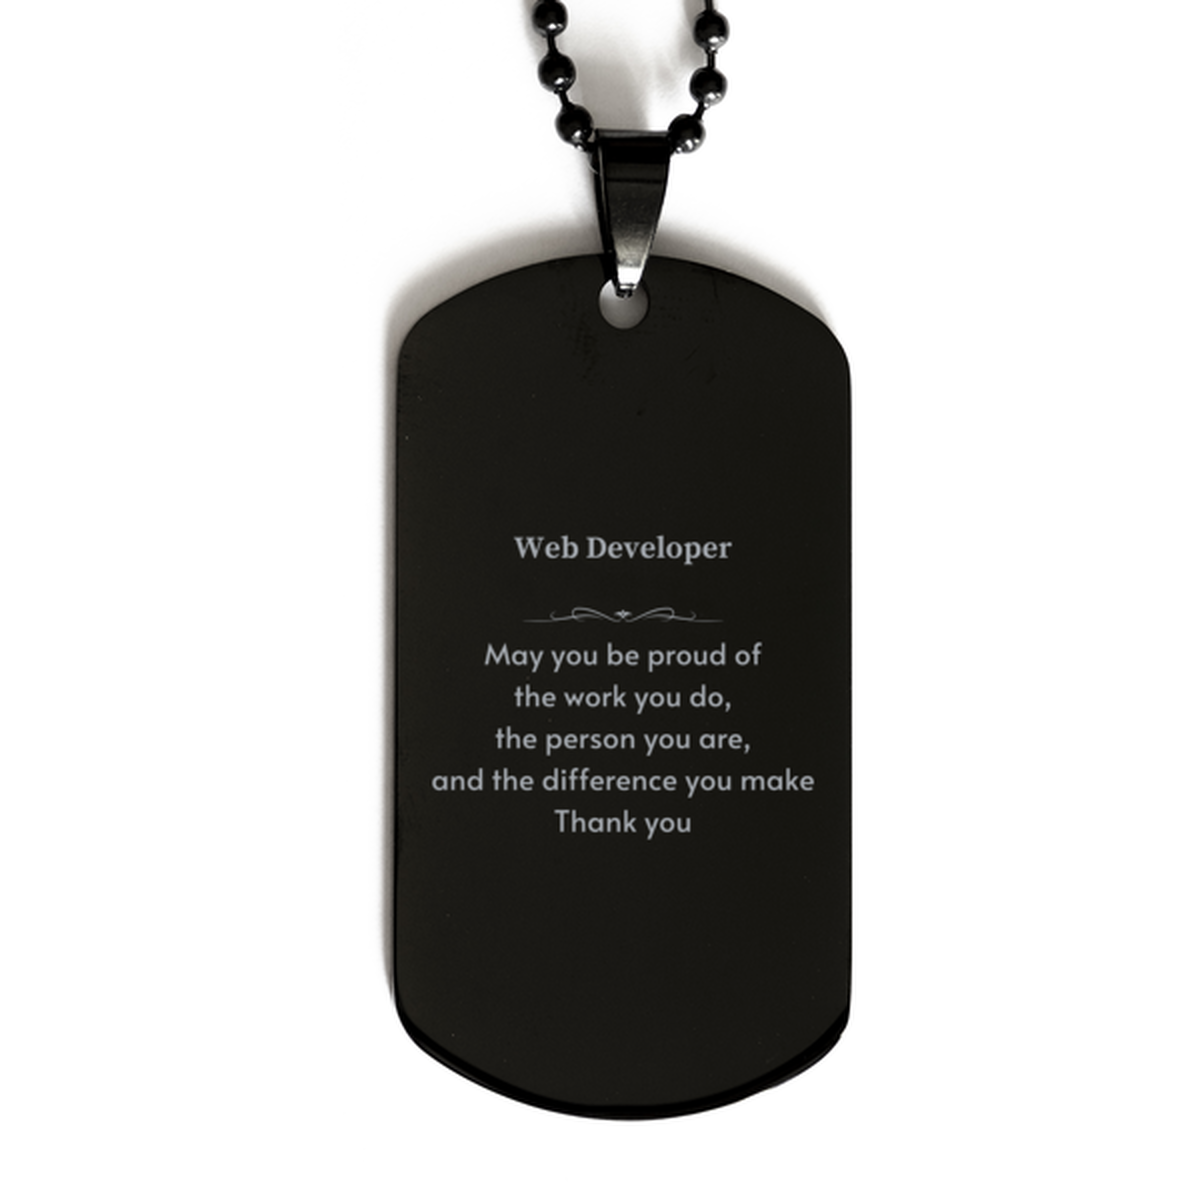 Heartwarming Black Dog Tag Retirement Coworkers Gifts for Web Developer, Web Developer May You be proud of the work you do, the person you are Gifts for Boss Men Women Friends